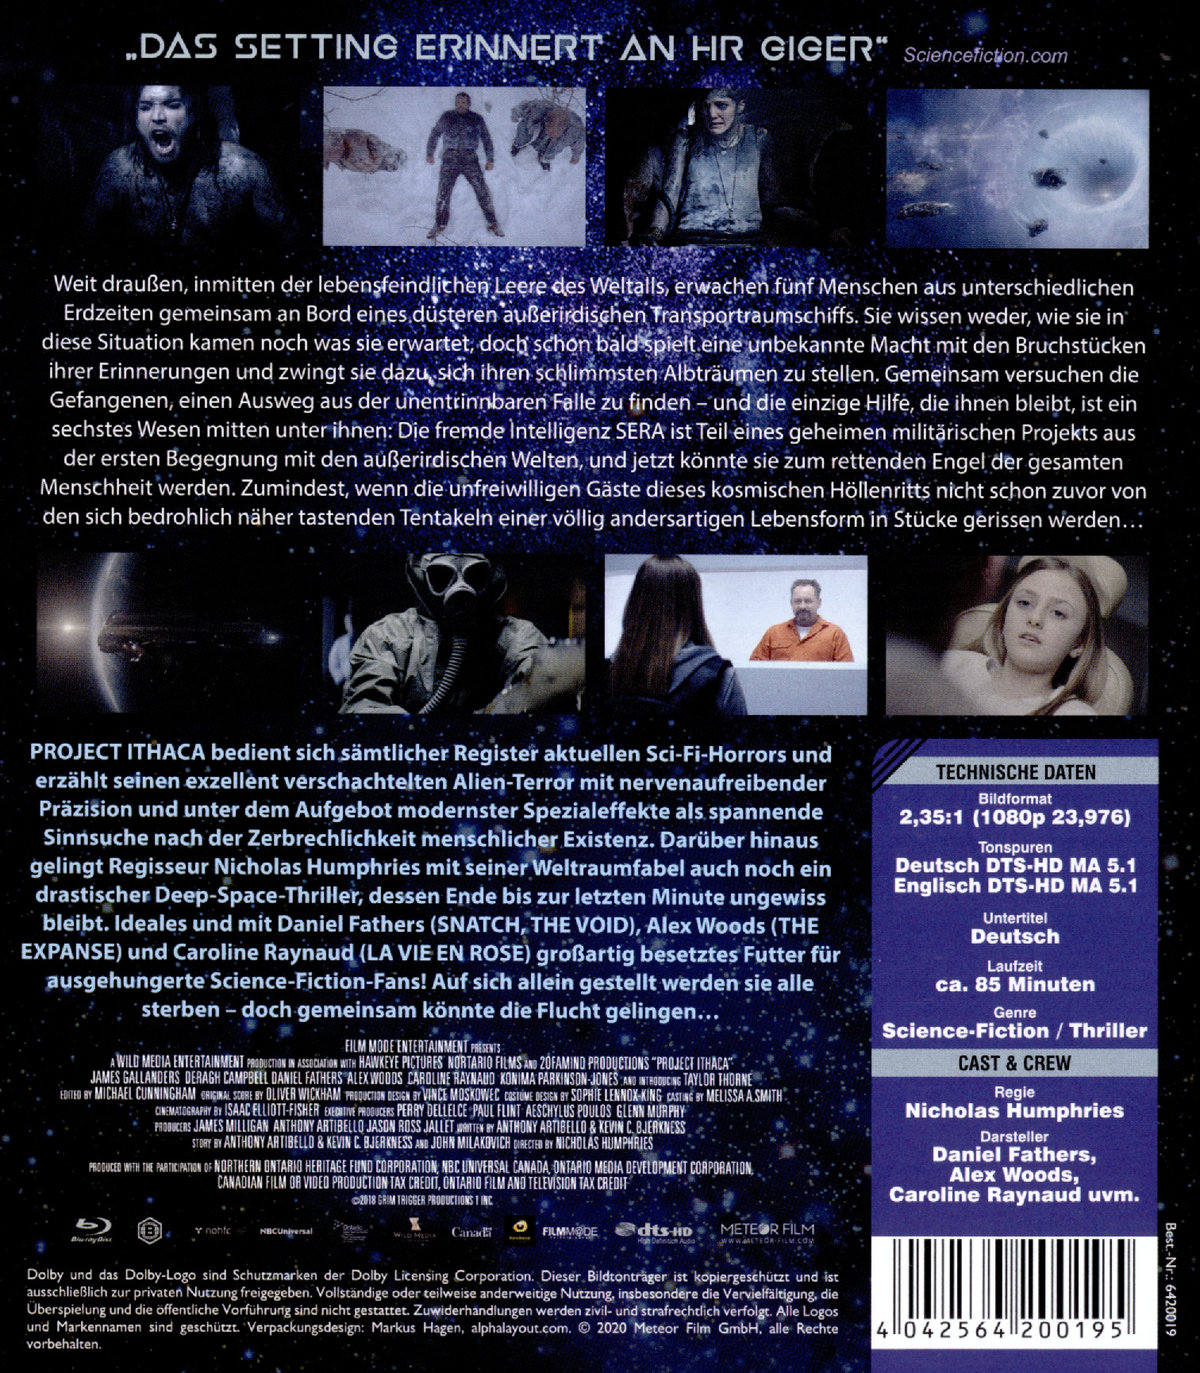 Project Ithaca (blu-ray)